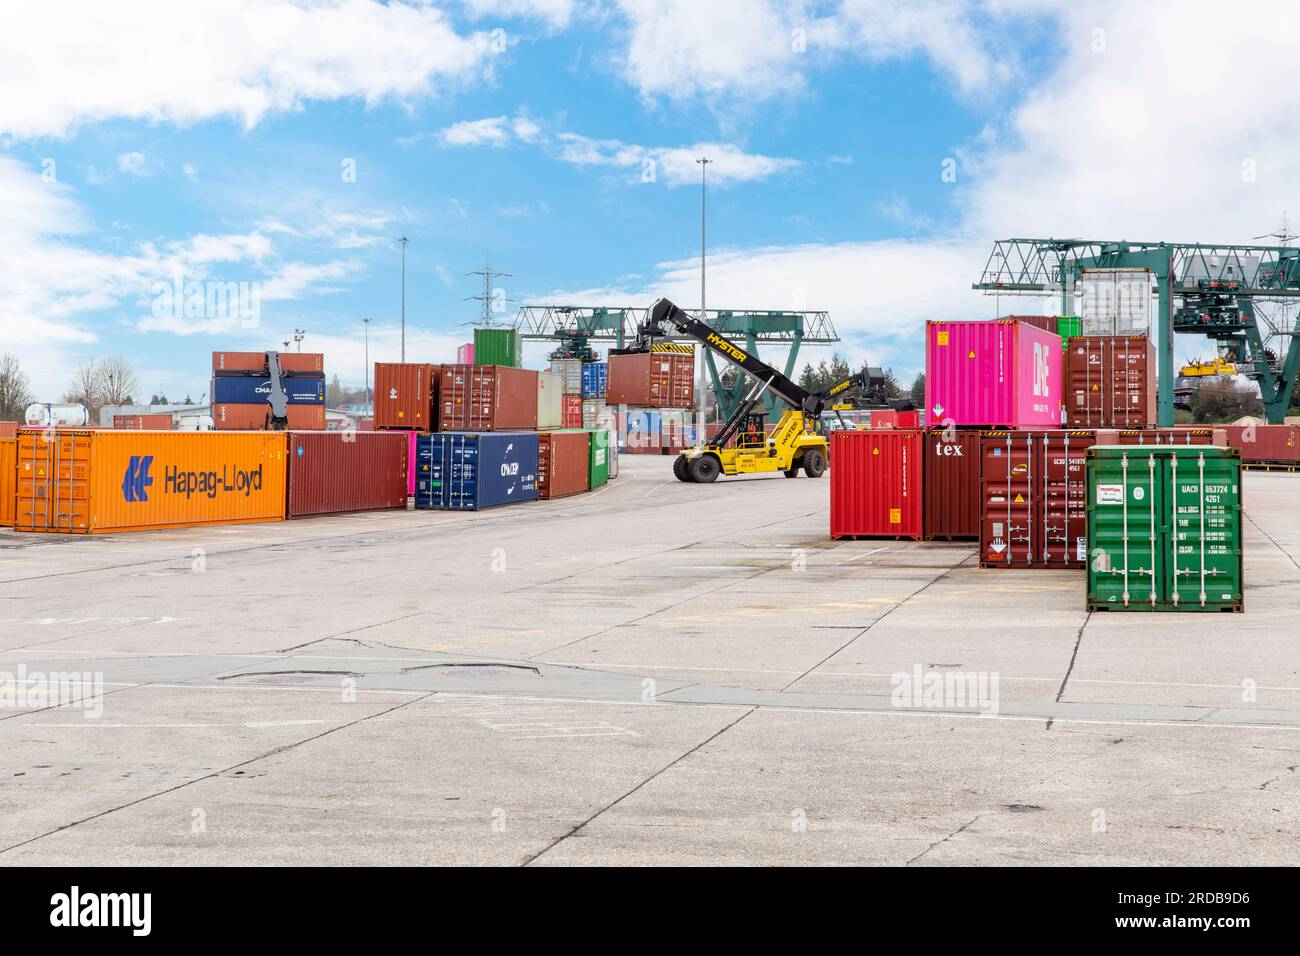 A top loader vehicle moves and stacks intermodal shipping containers at an Inland Container Depot (ICD) in England. Stock Photo